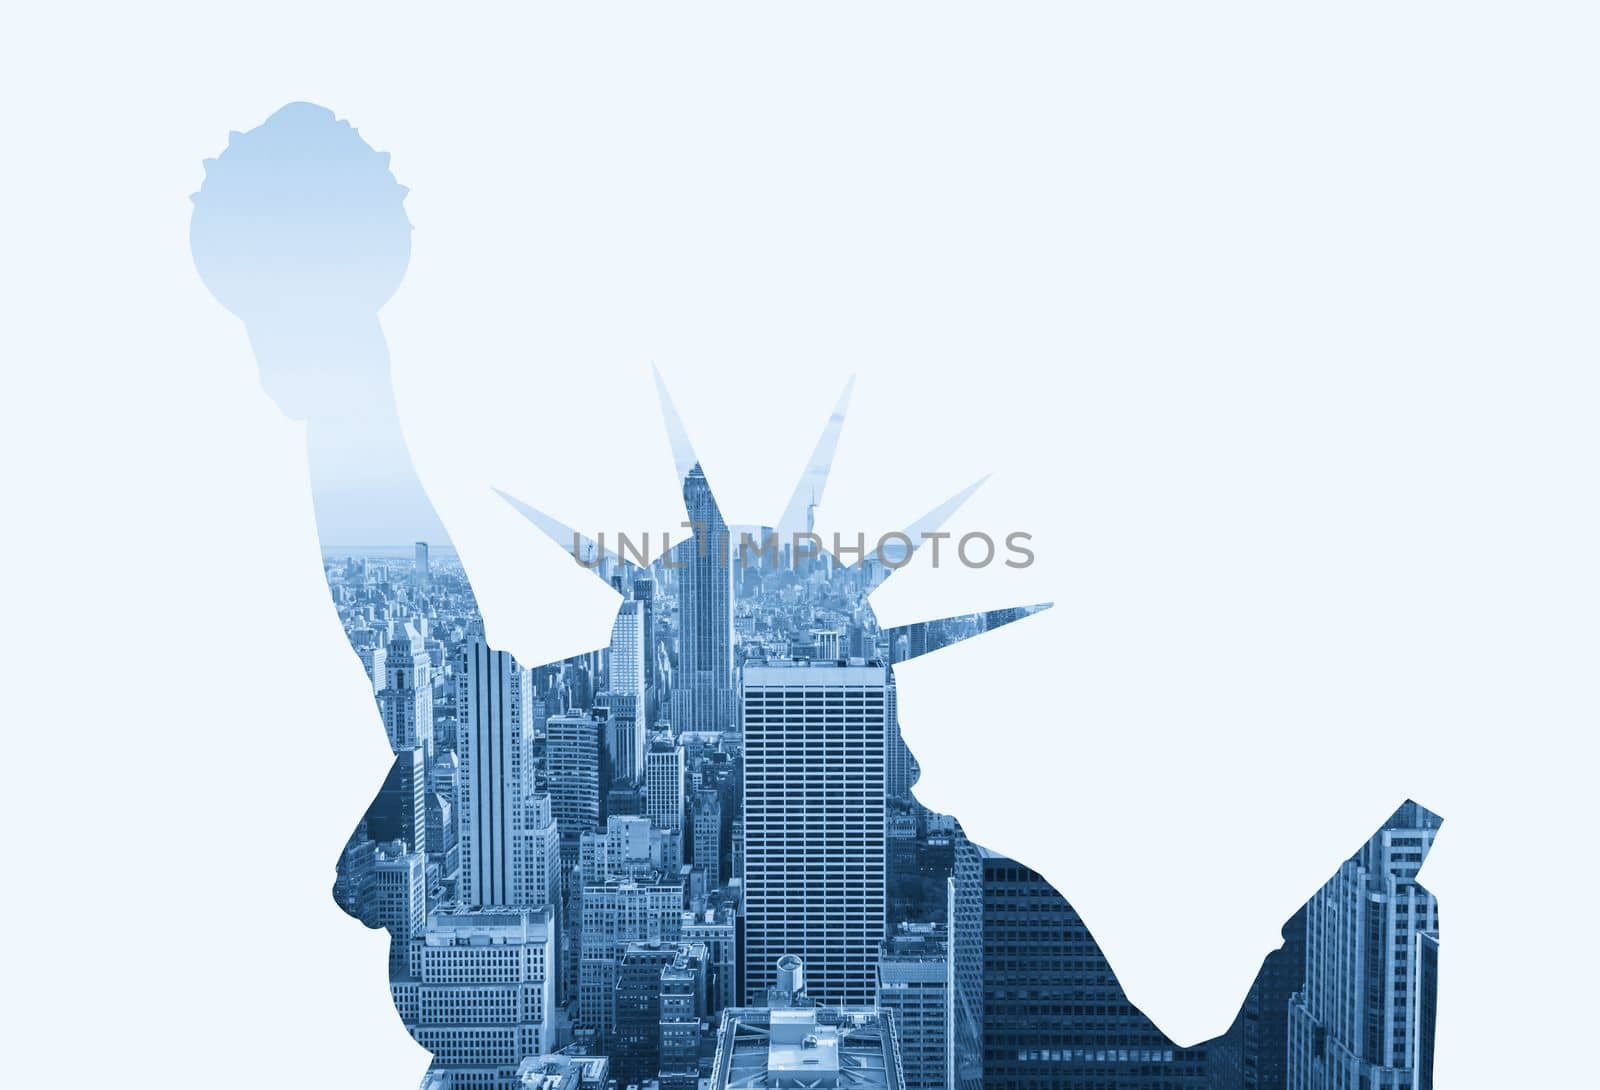 Double exposure of Manhattan skyline in new york city with statue of liberty silhouette by Mariakray